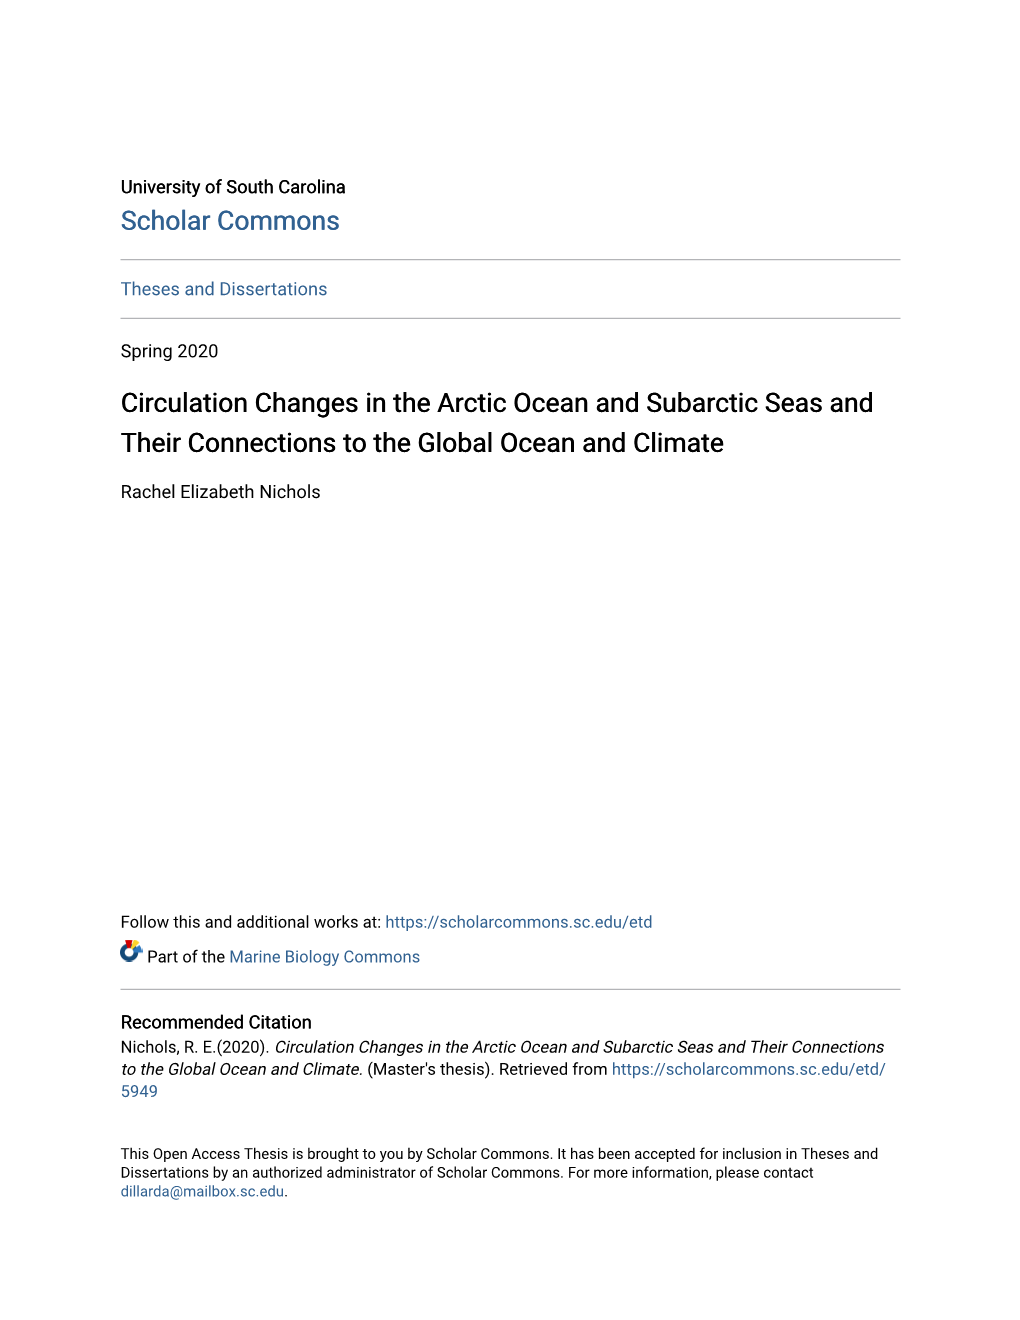 Circulation Changes in the Arctic Ocean and Subarctic Seas and Their Connections to the Global Ocean and Climate